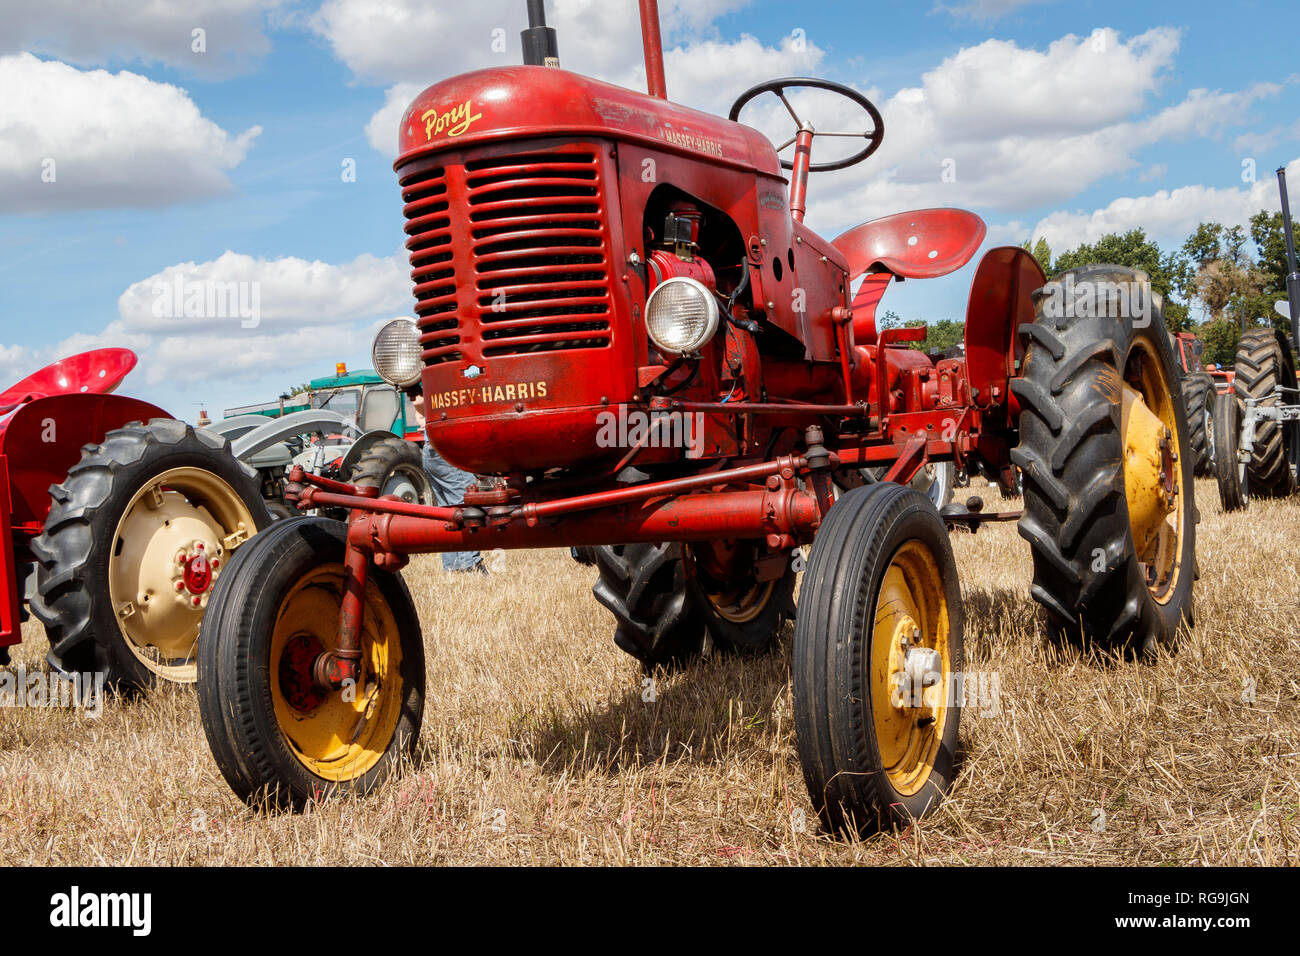 1952 Massey Harris Pony tractor on display at the 2018 Starting Handle Club Summer Show, Norfolk, UK. Stock Photo